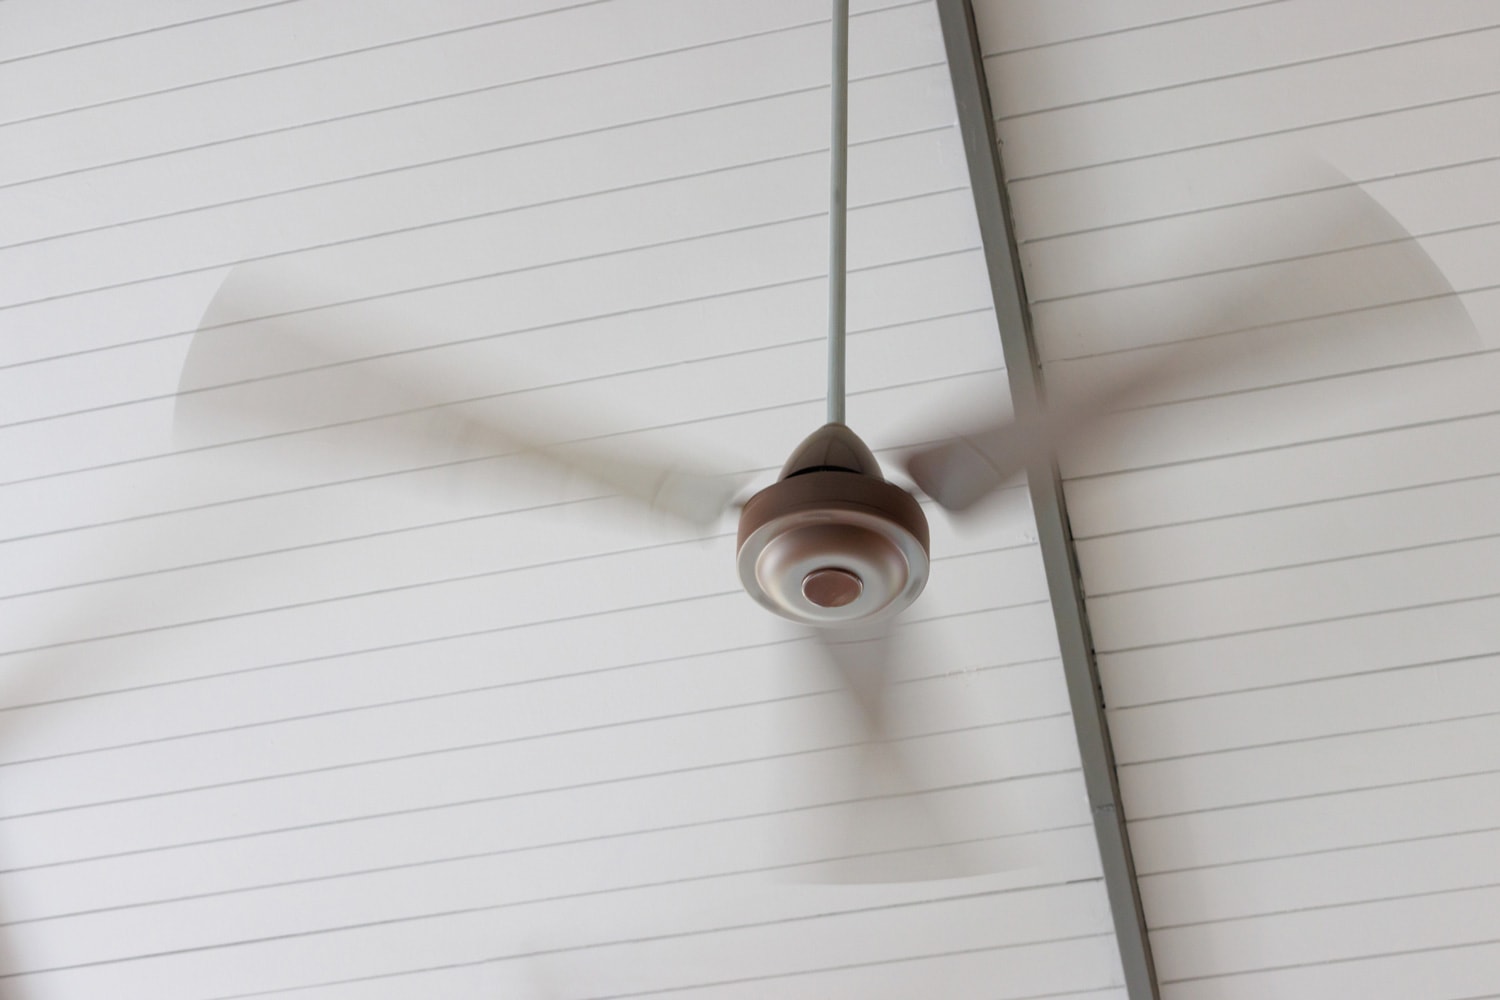 Moving brown ceiling fan on white ceiling in house.